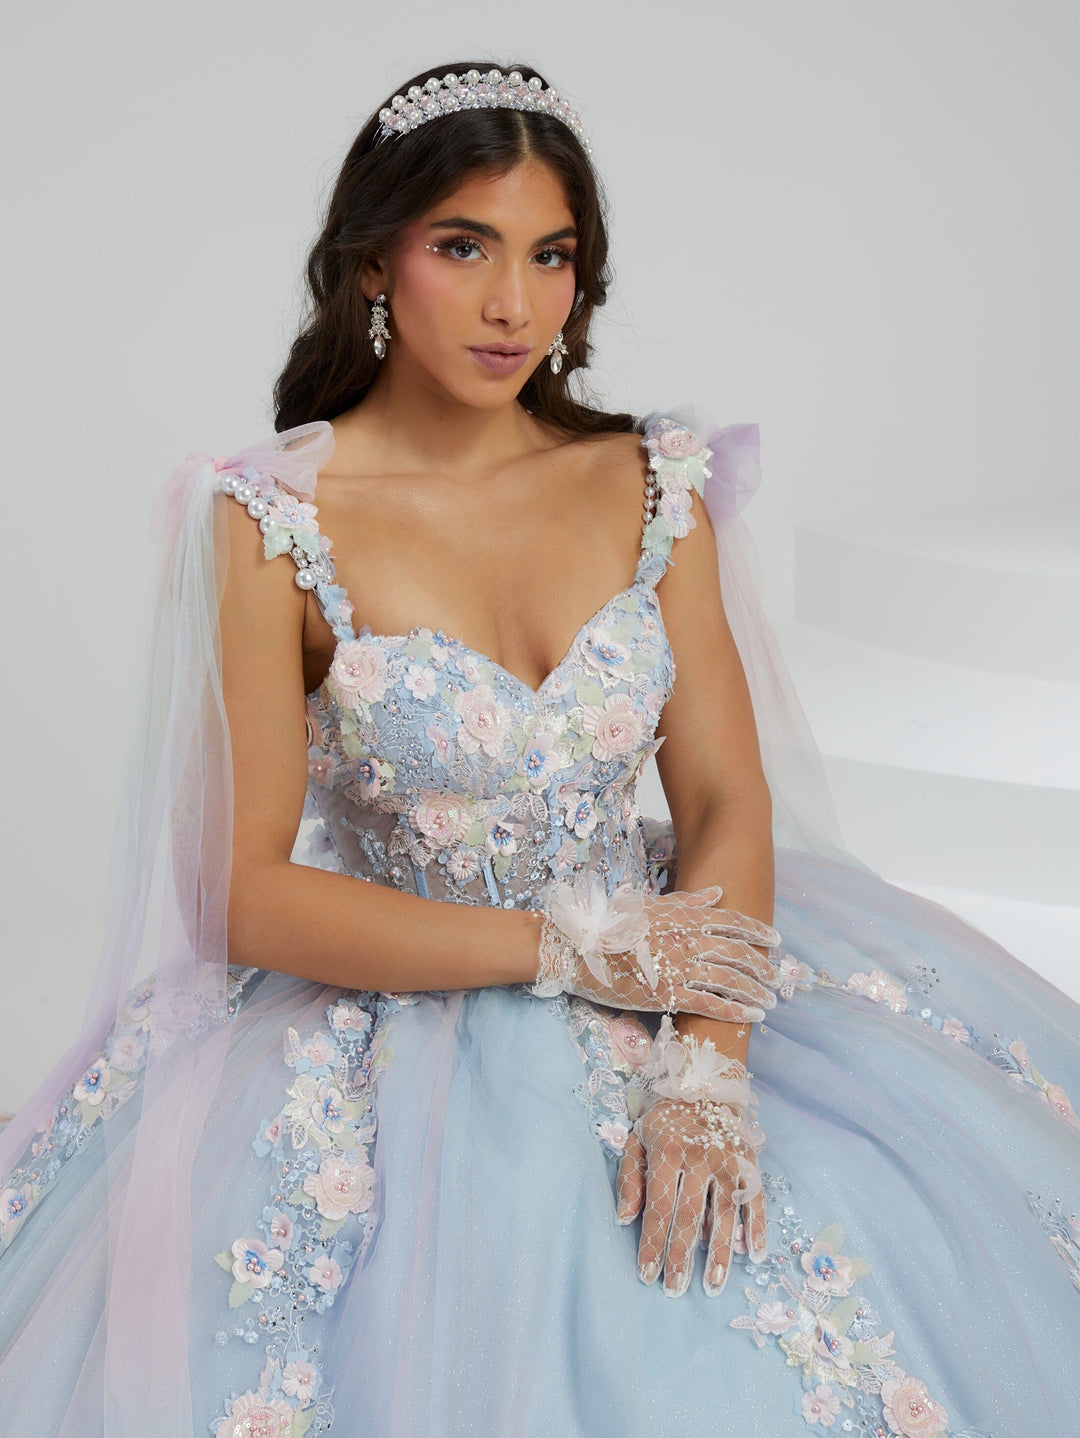 3D Floral Corset Quinceanera Dress by House of Wu 26067